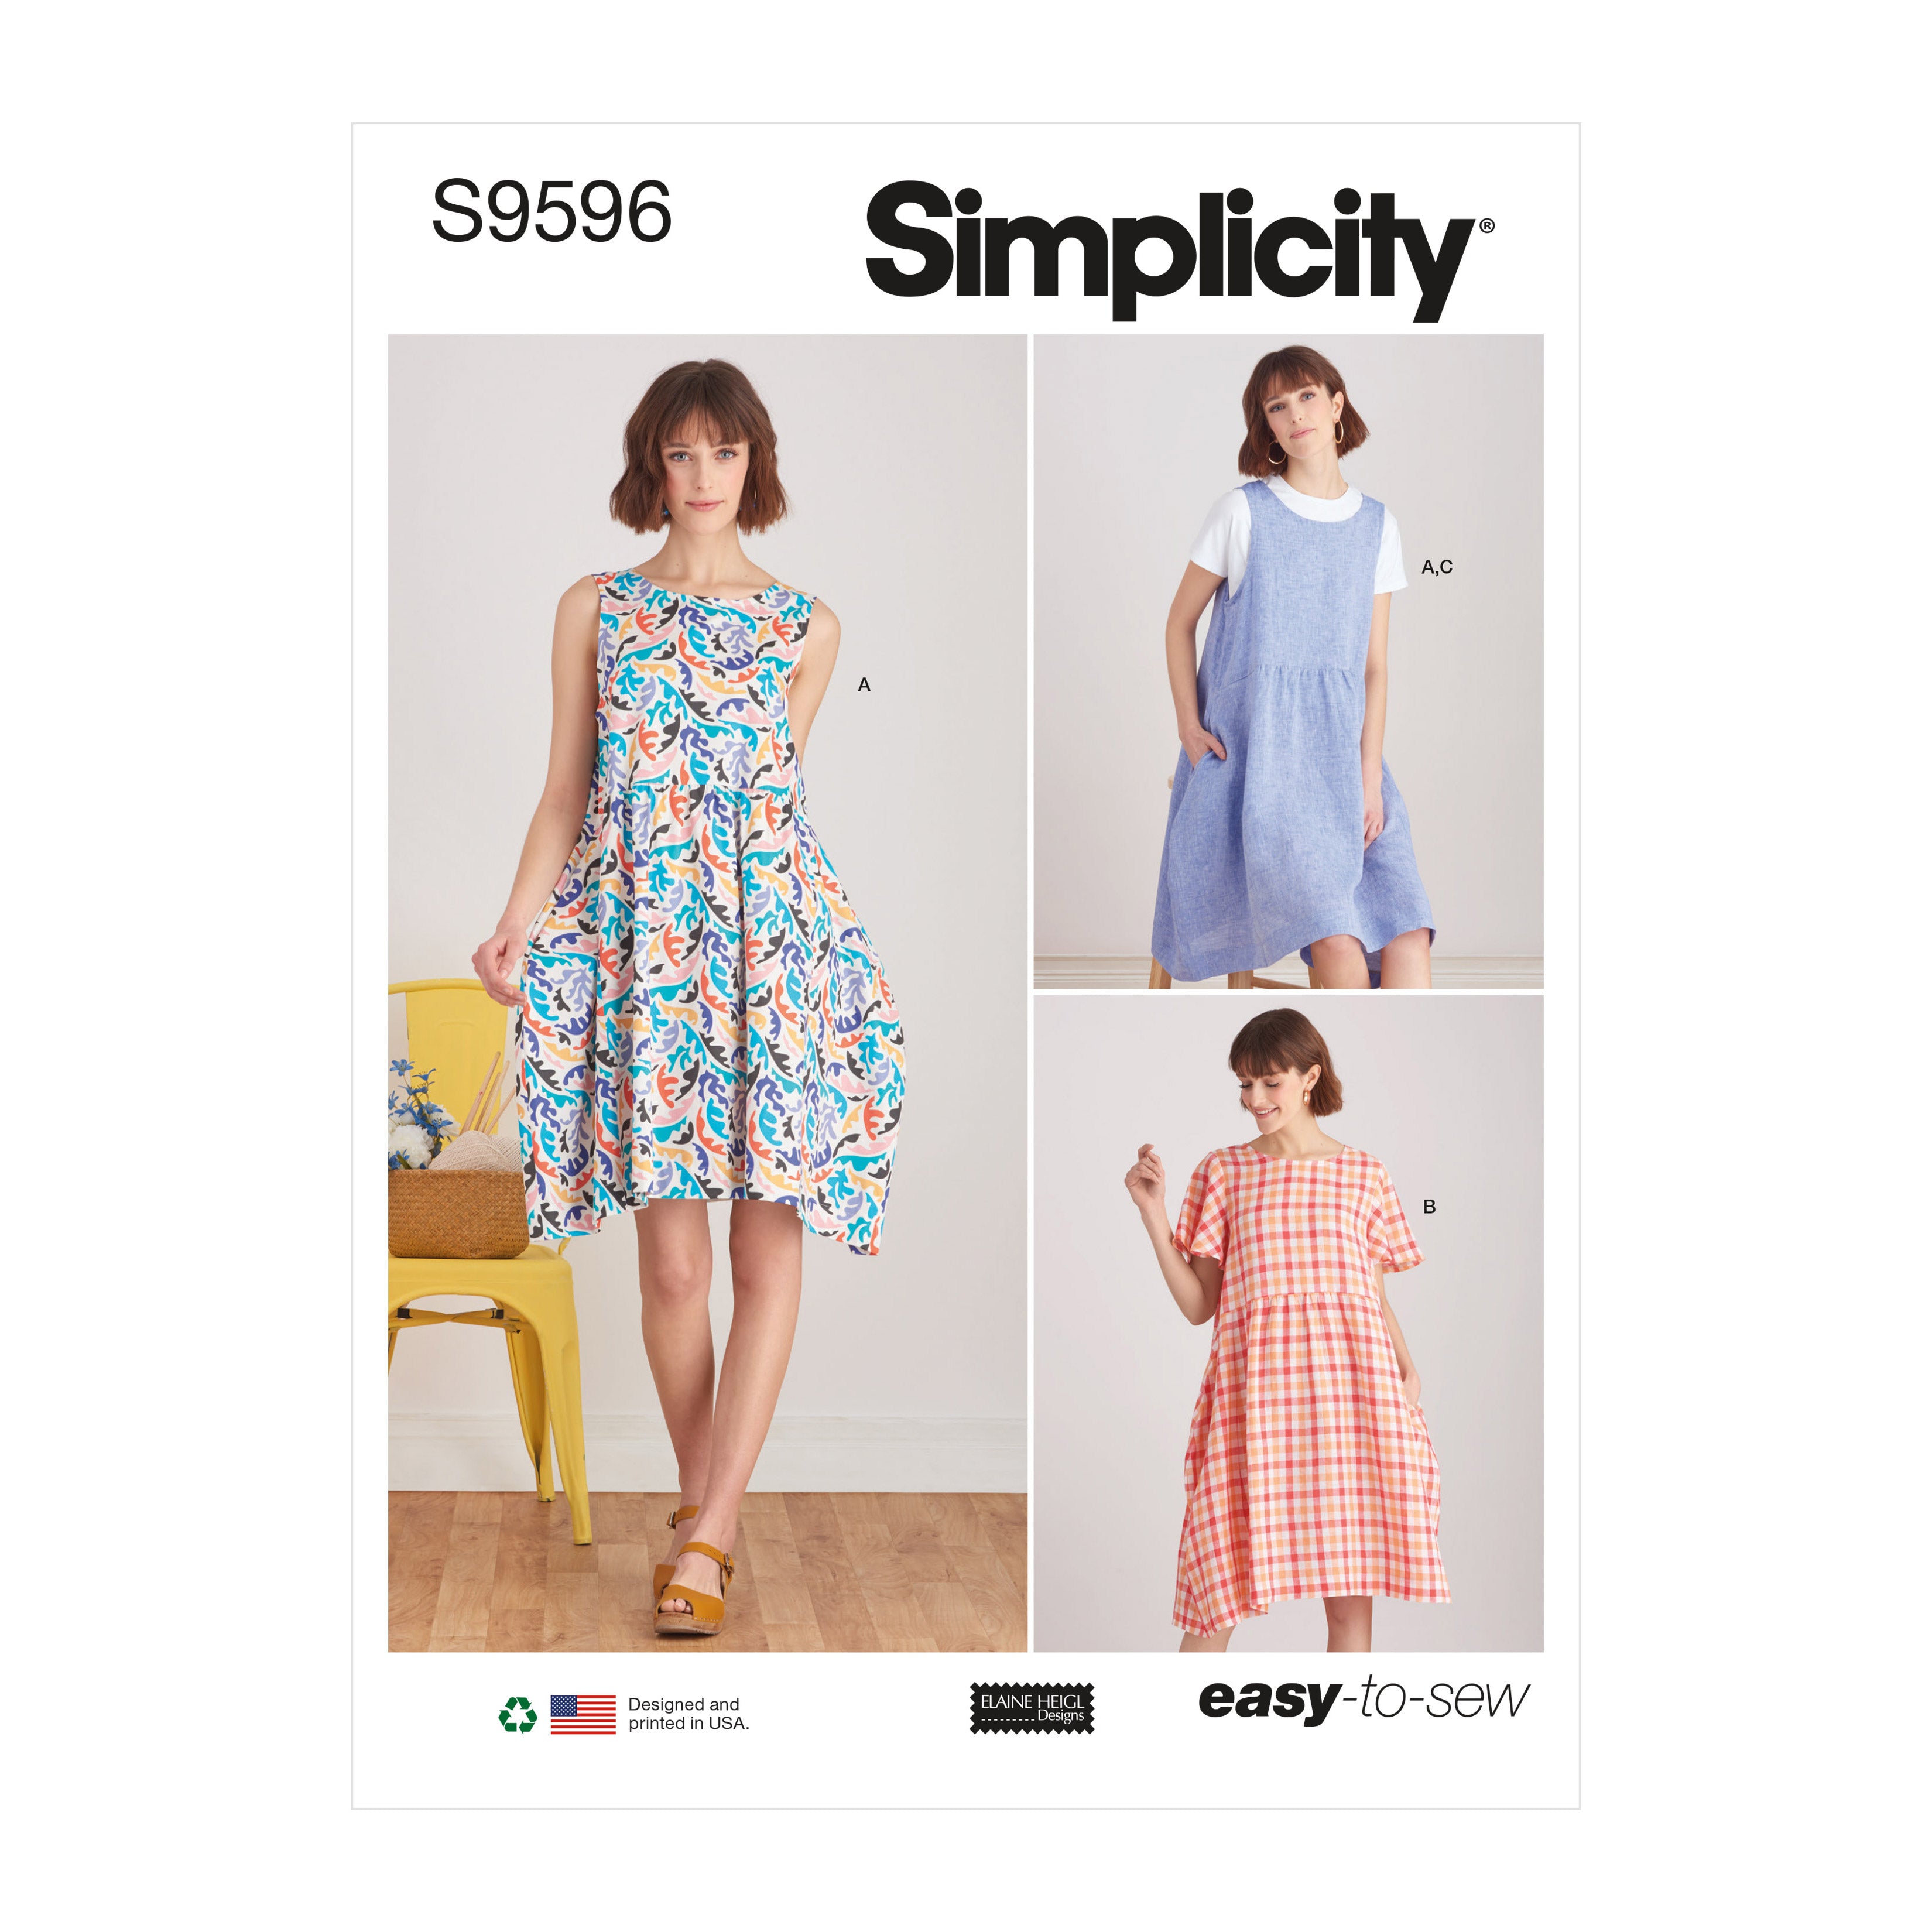 Simplicity Sewing Pattern S9596 - Misses' Pullover Dress and Knit